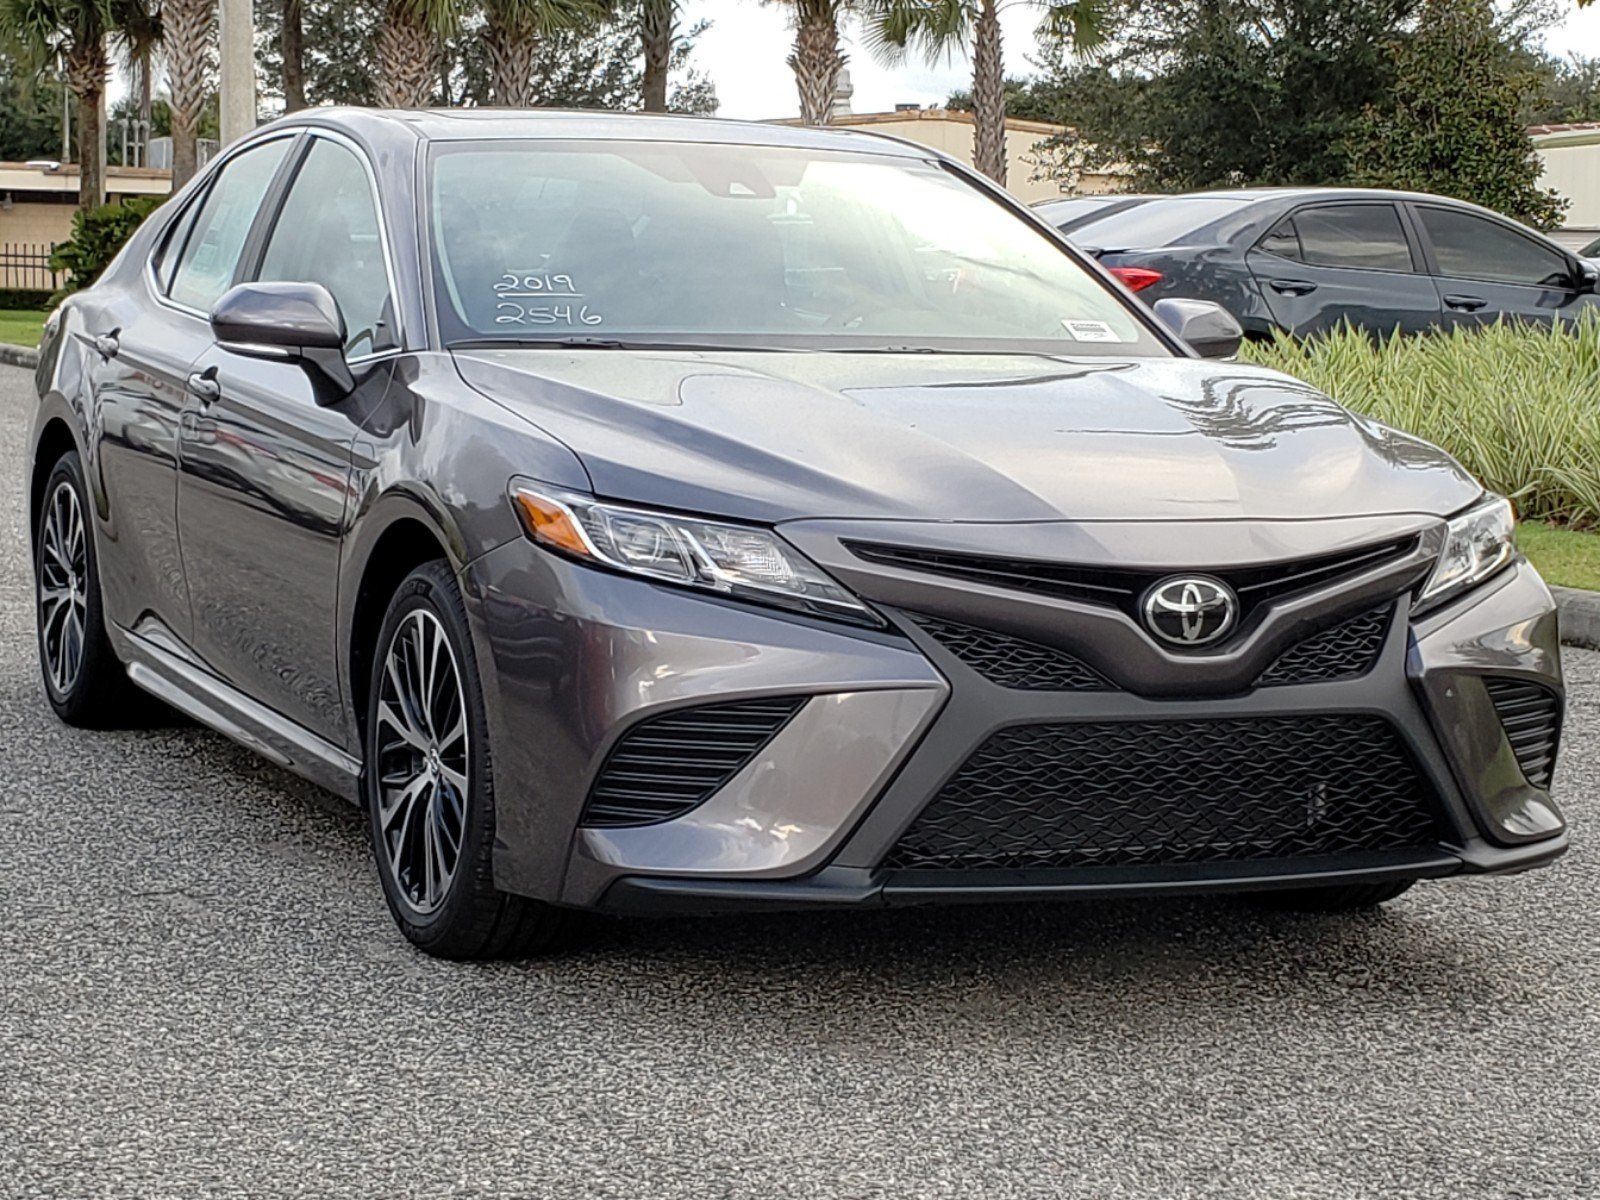 New 2019 Toyota Camry SE 4dr Car in Orlando 9250003